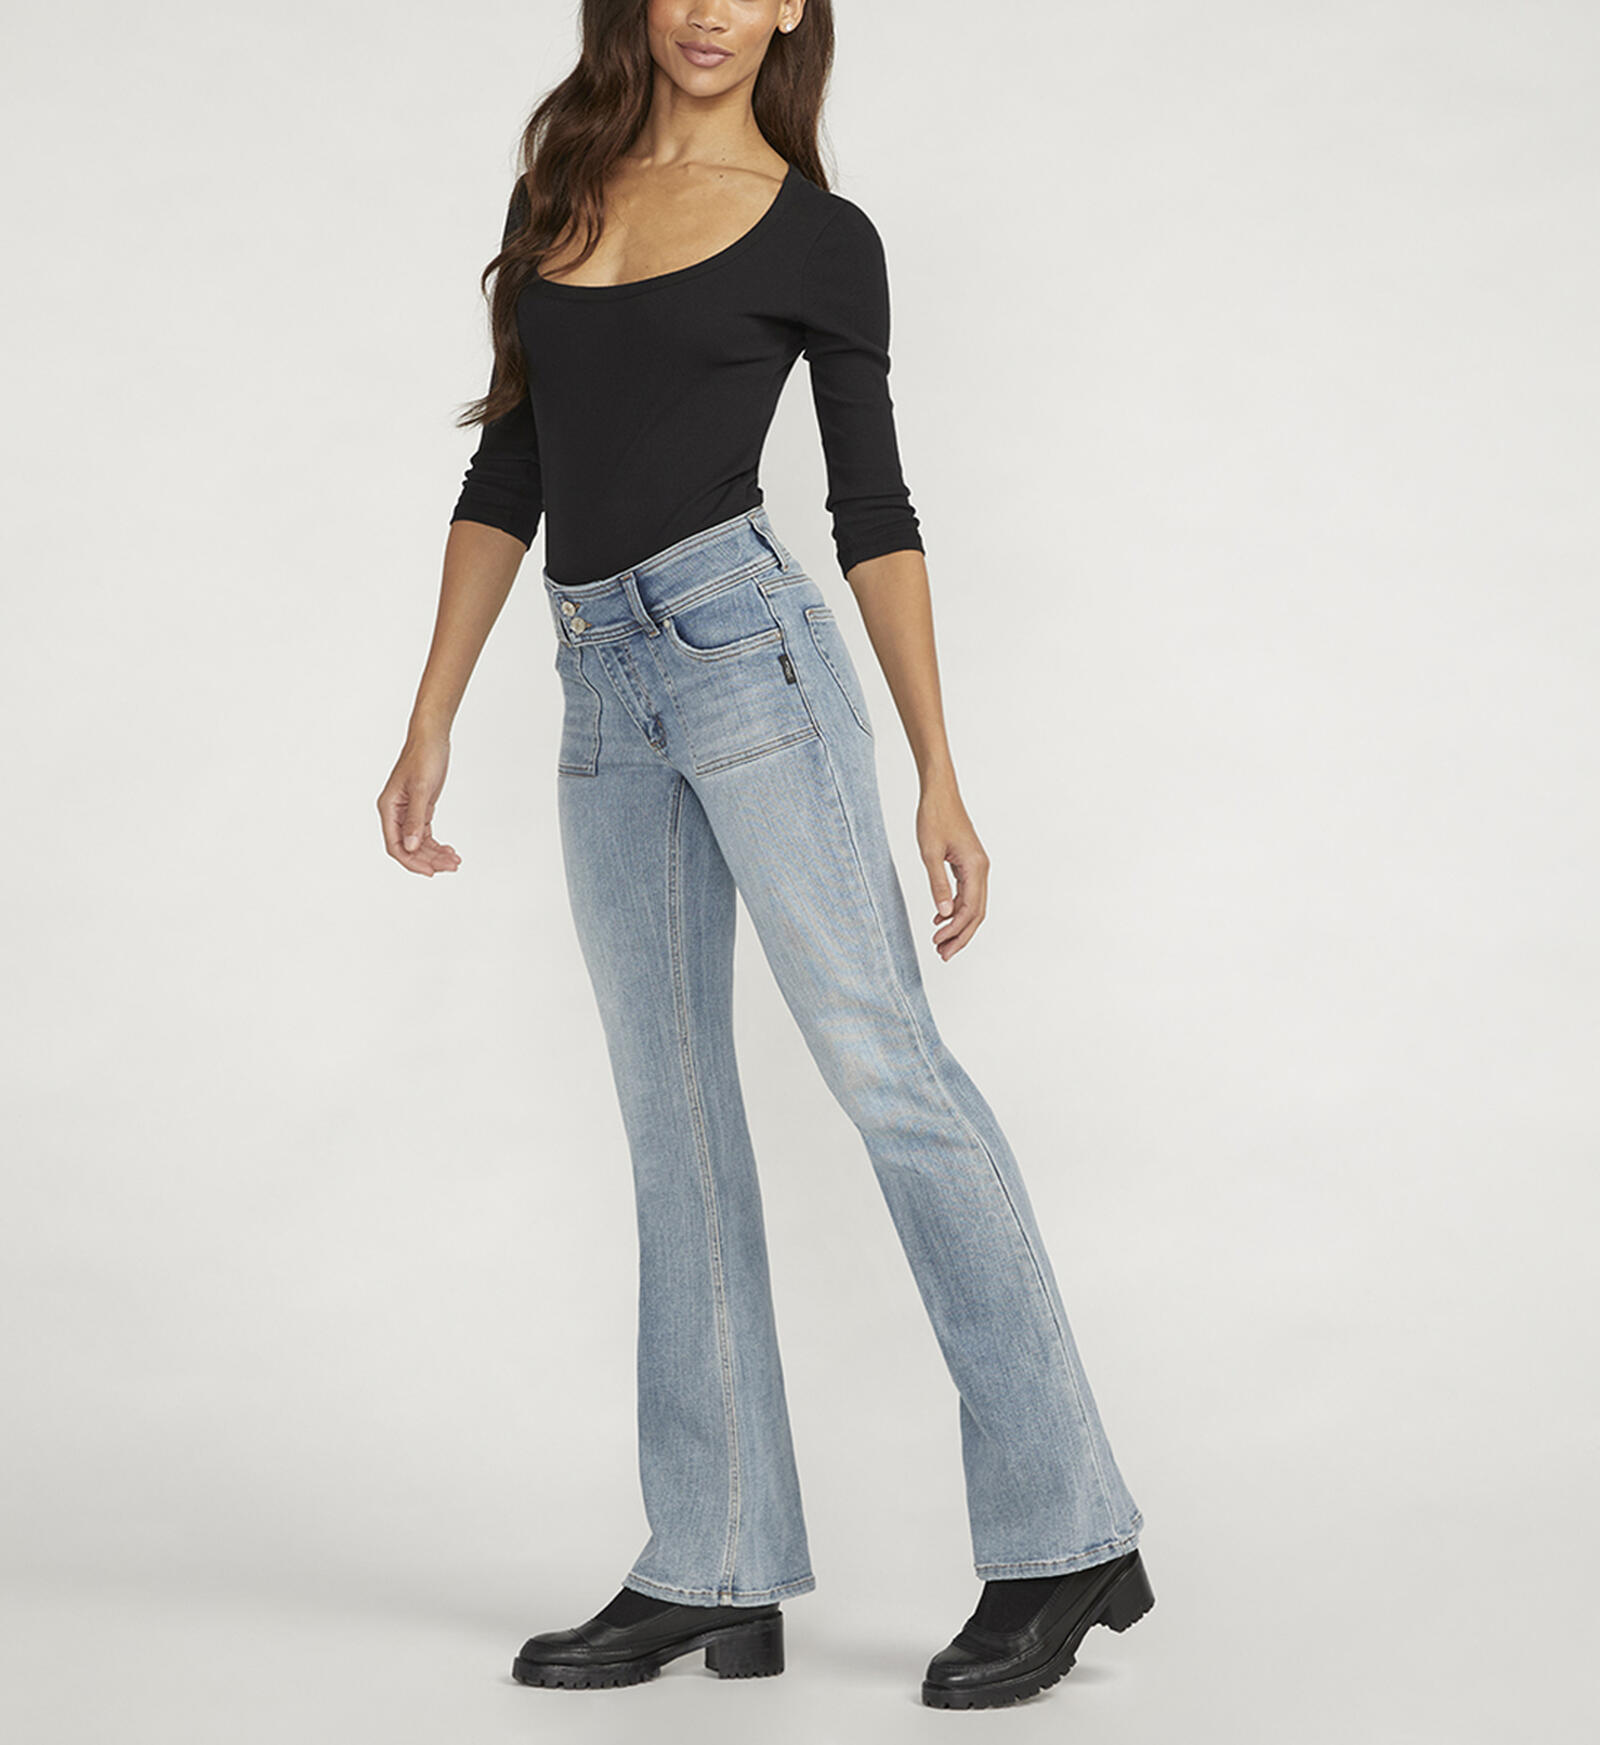 Women's Low Rise Jeans, Flare, Baggy & Skinny